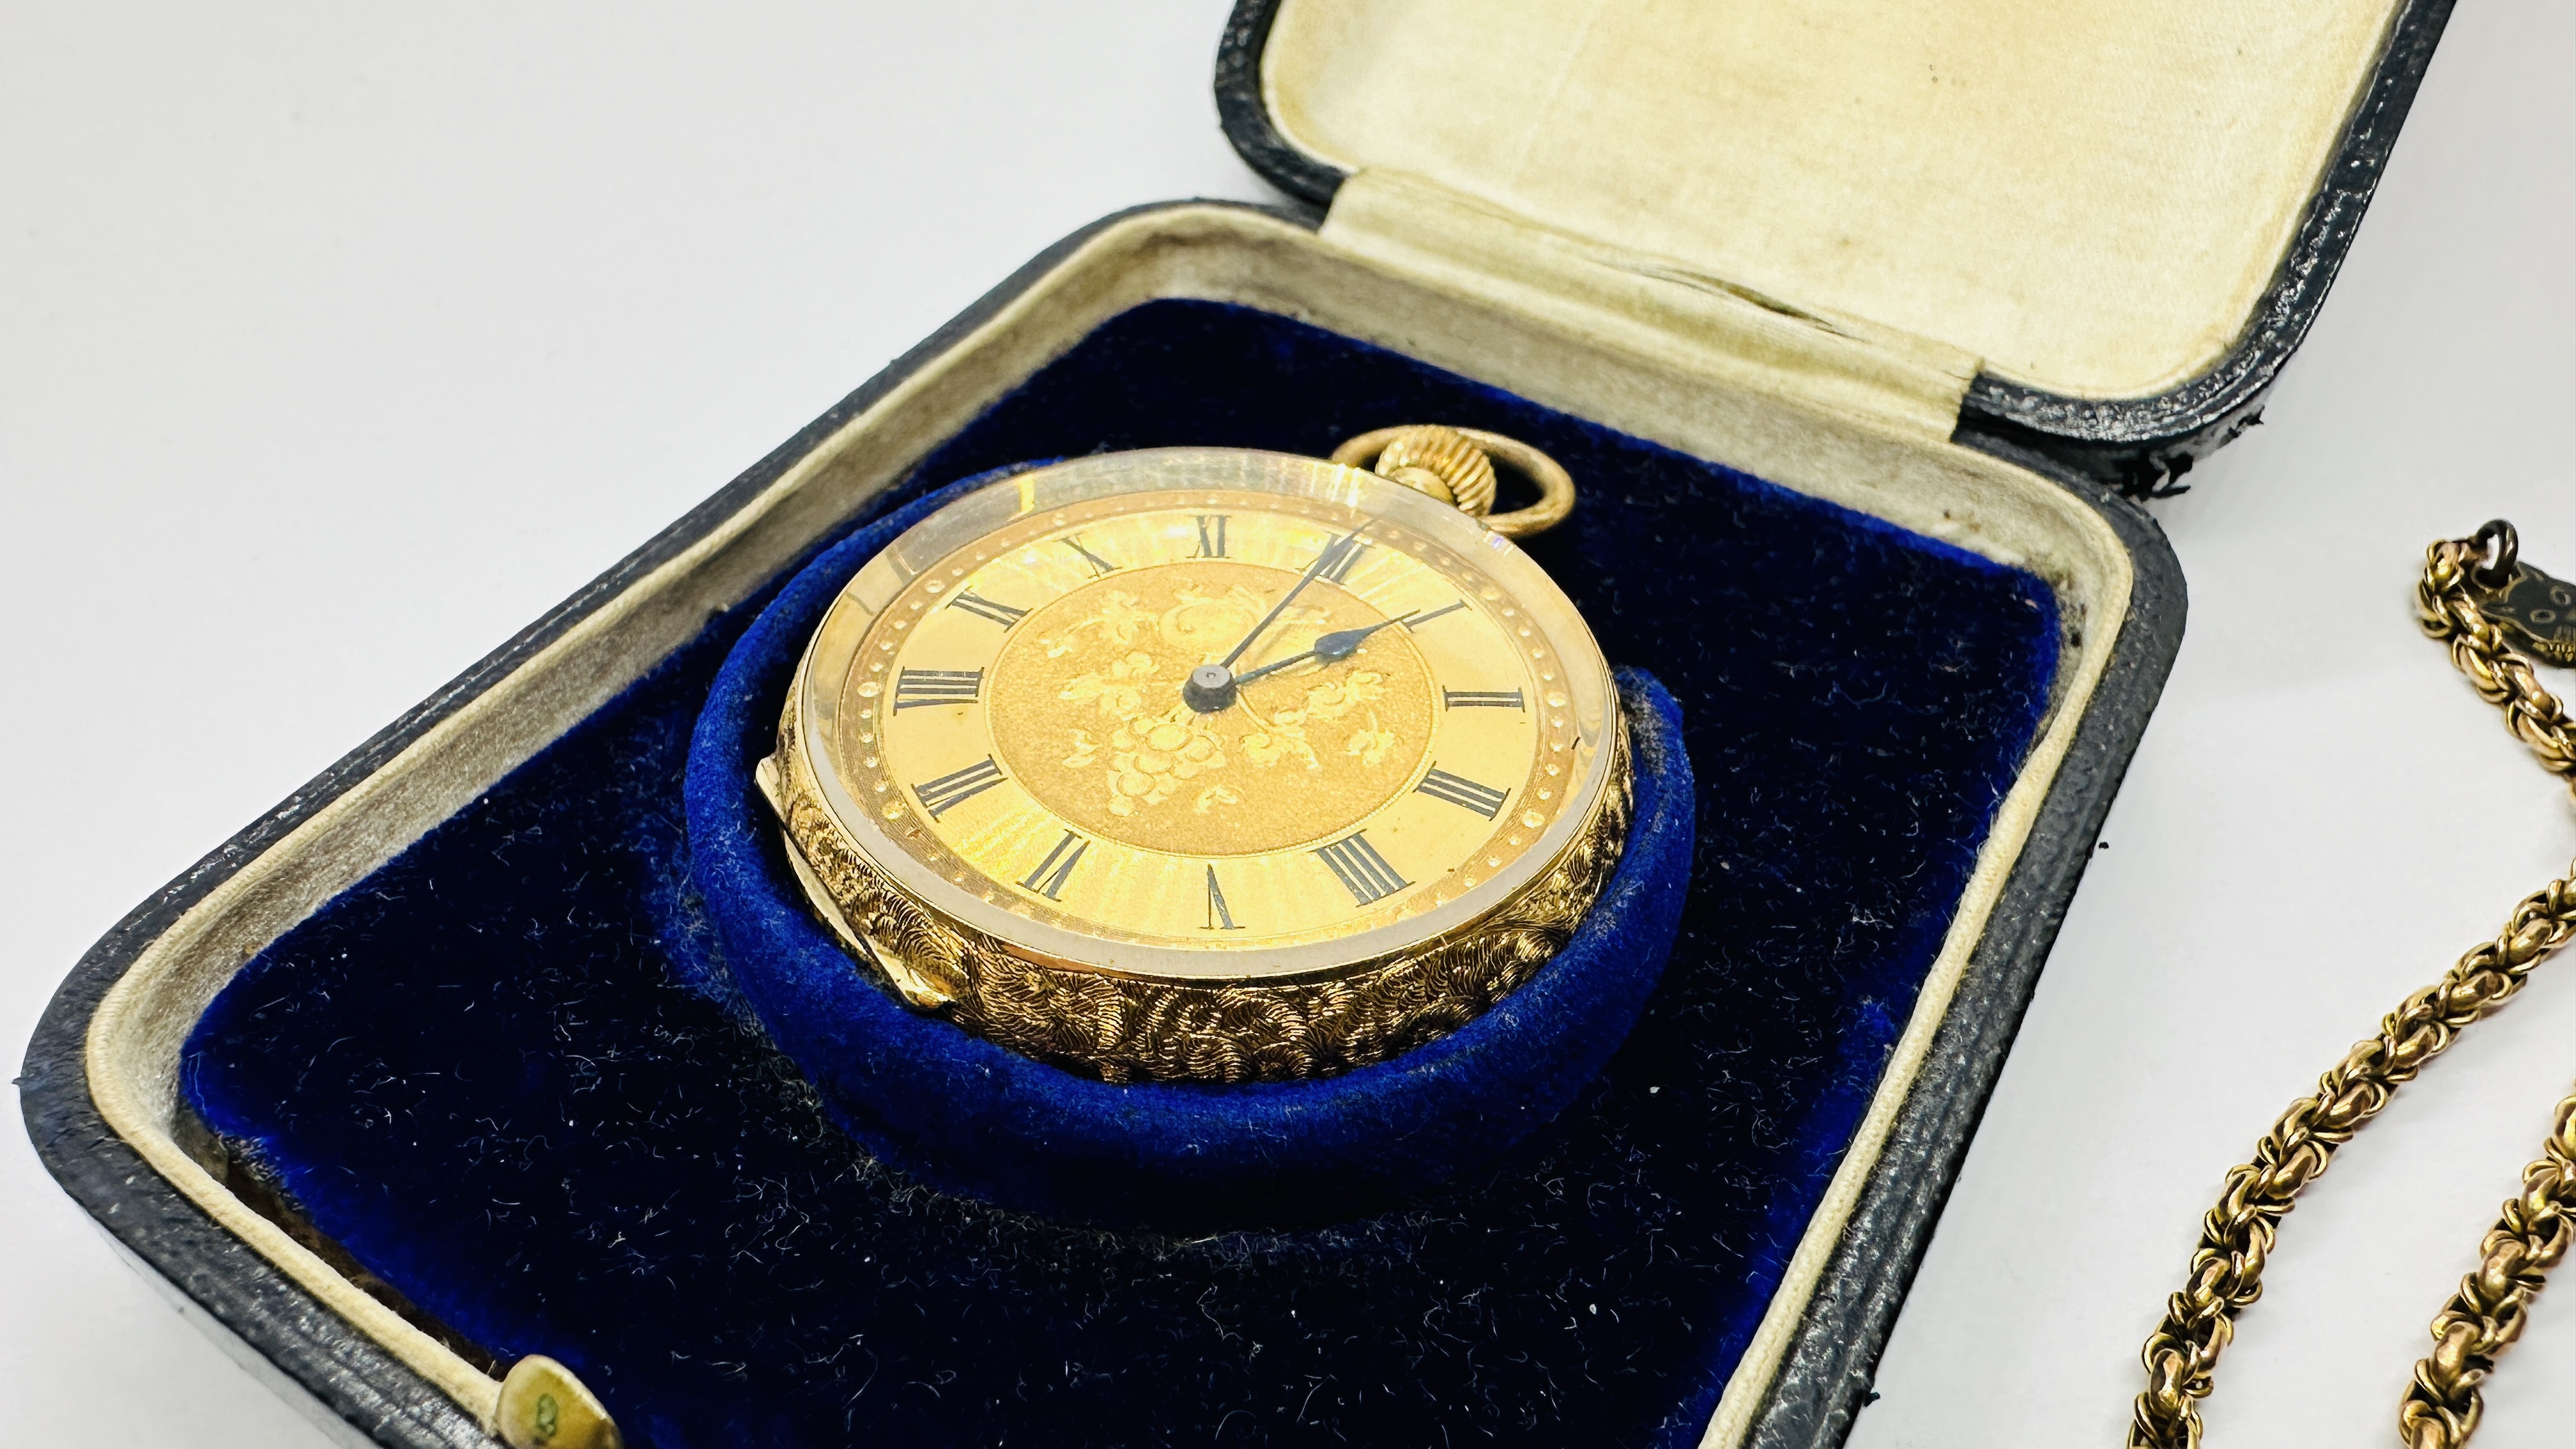 AN ELABORATE ANTIQUE 18CT GOLD CASED HALF HUNTER POCKET WATCH ALONG WITH A WOVEN WATCH CHAIN, - Image 3 of 17